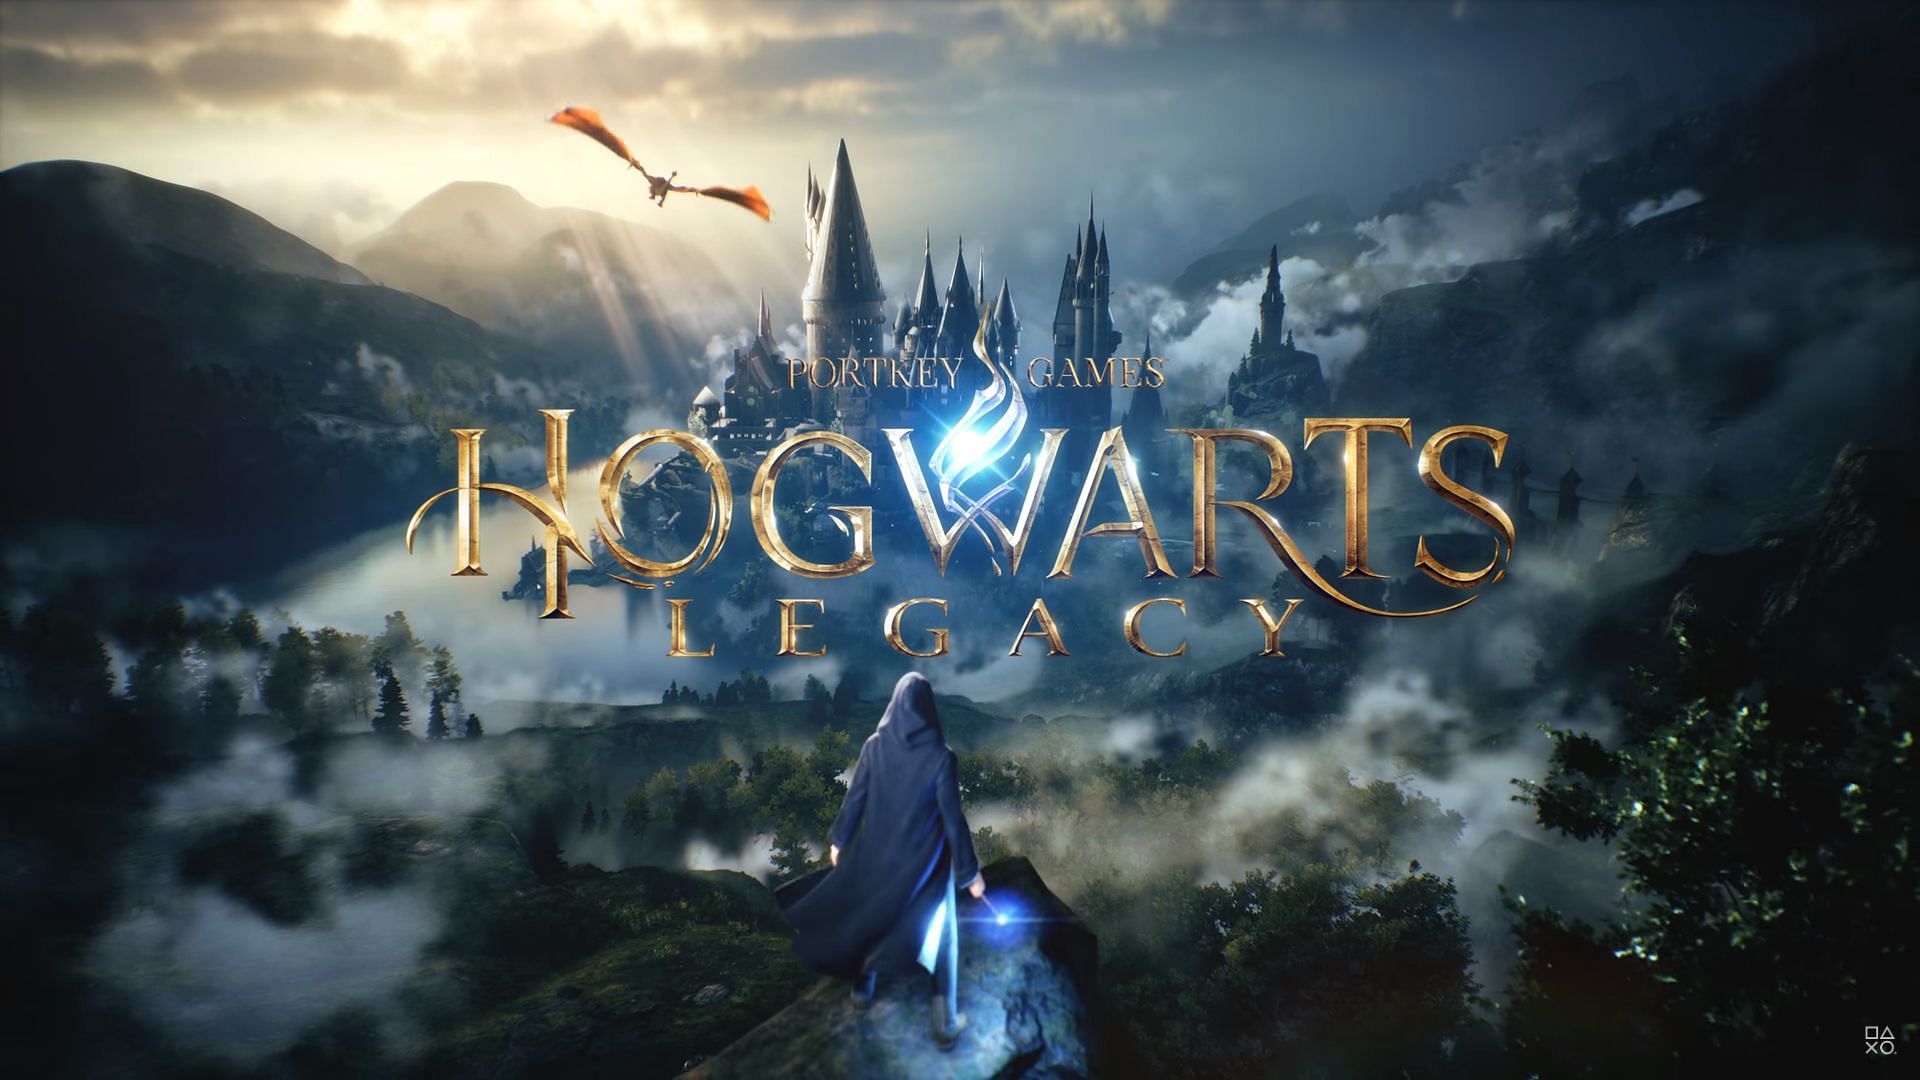 Hogwarts Legacy is due for a 2022 release date. (image via Portkey Games/ Warner Bros)